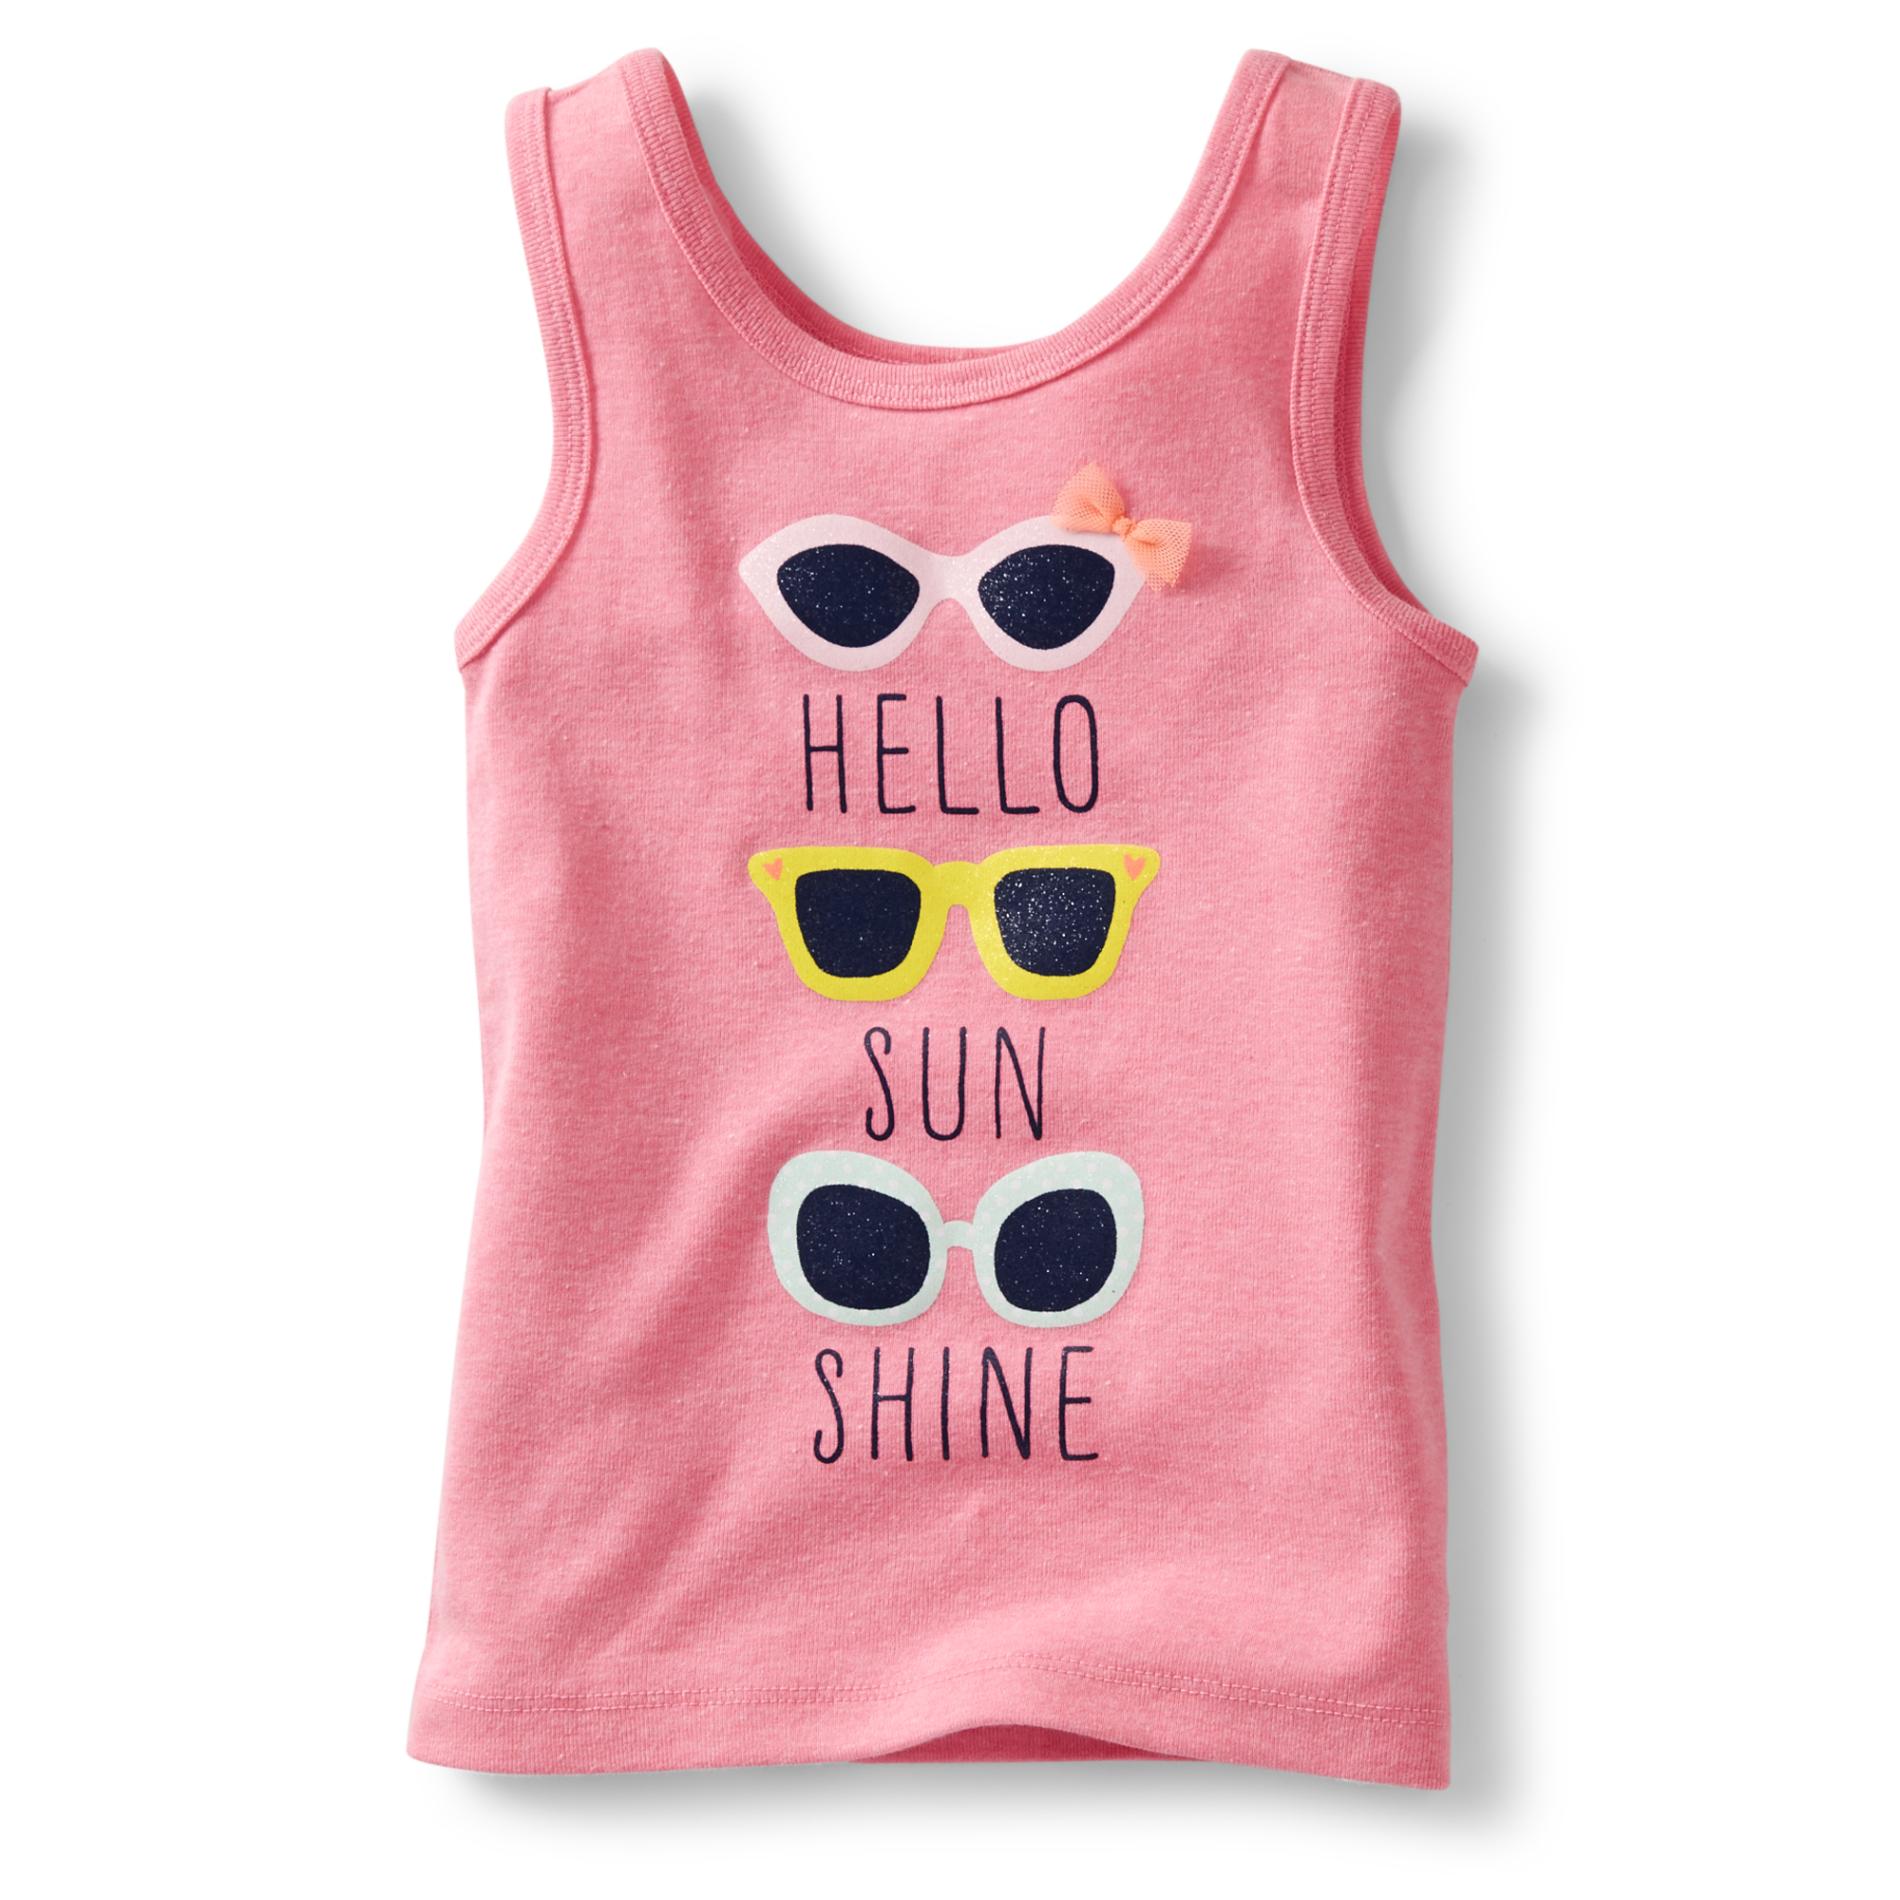 Carter's Toddler Girl's Graphic Tank Top - Sunglasses